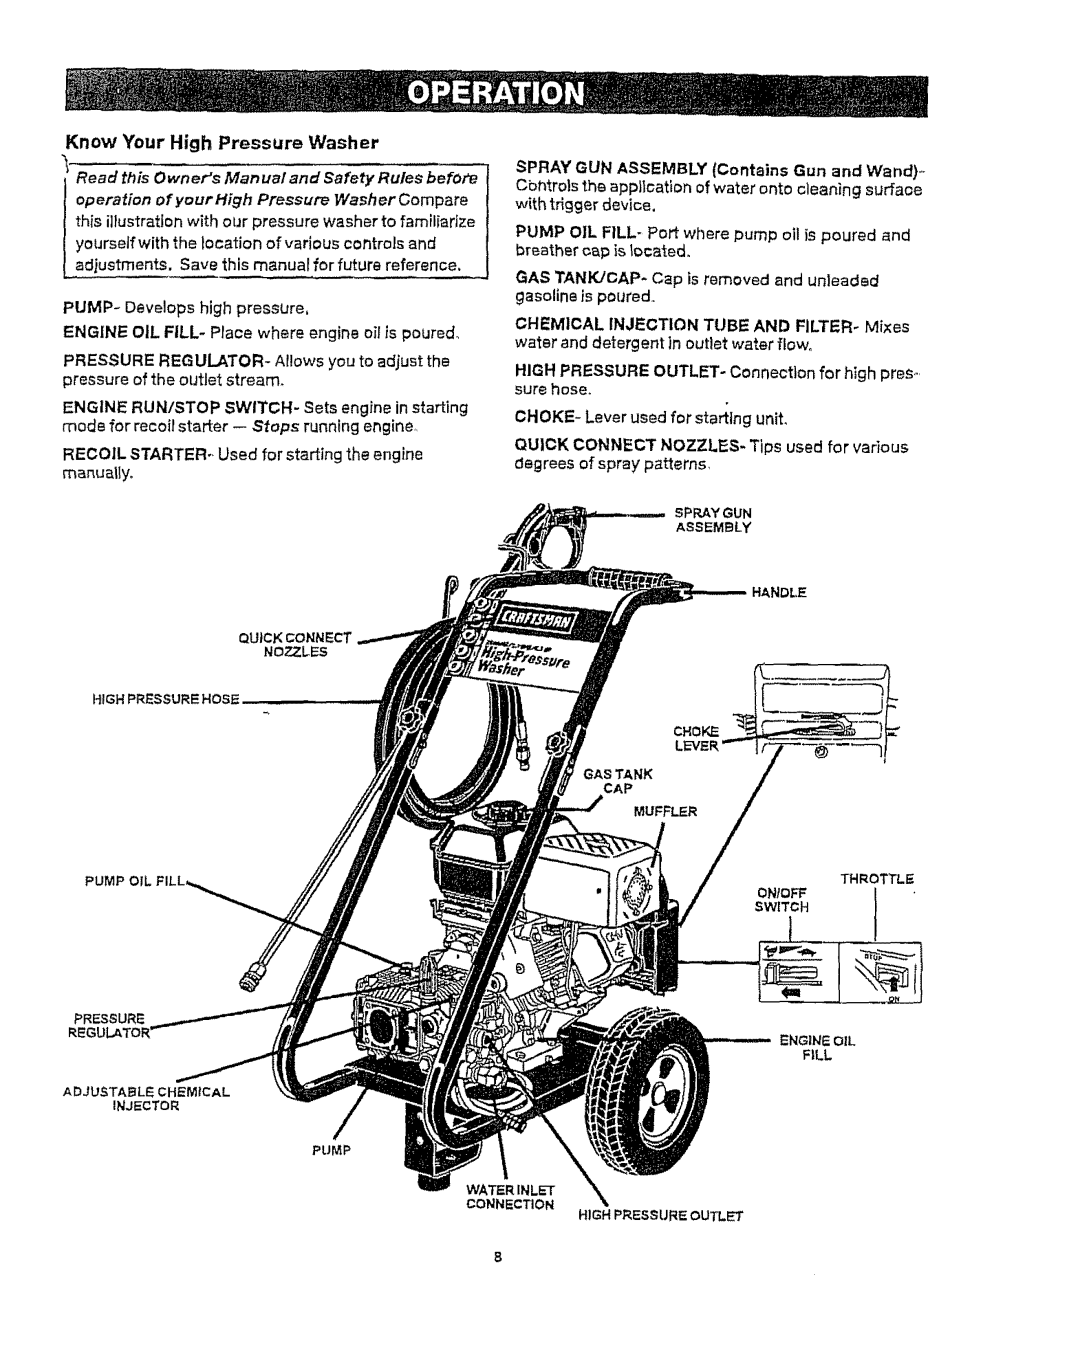 Craftsman 919.76902 manual Know Your High Pressure Washer, ENGINE OIL FILL- Place where engine oil is poured 